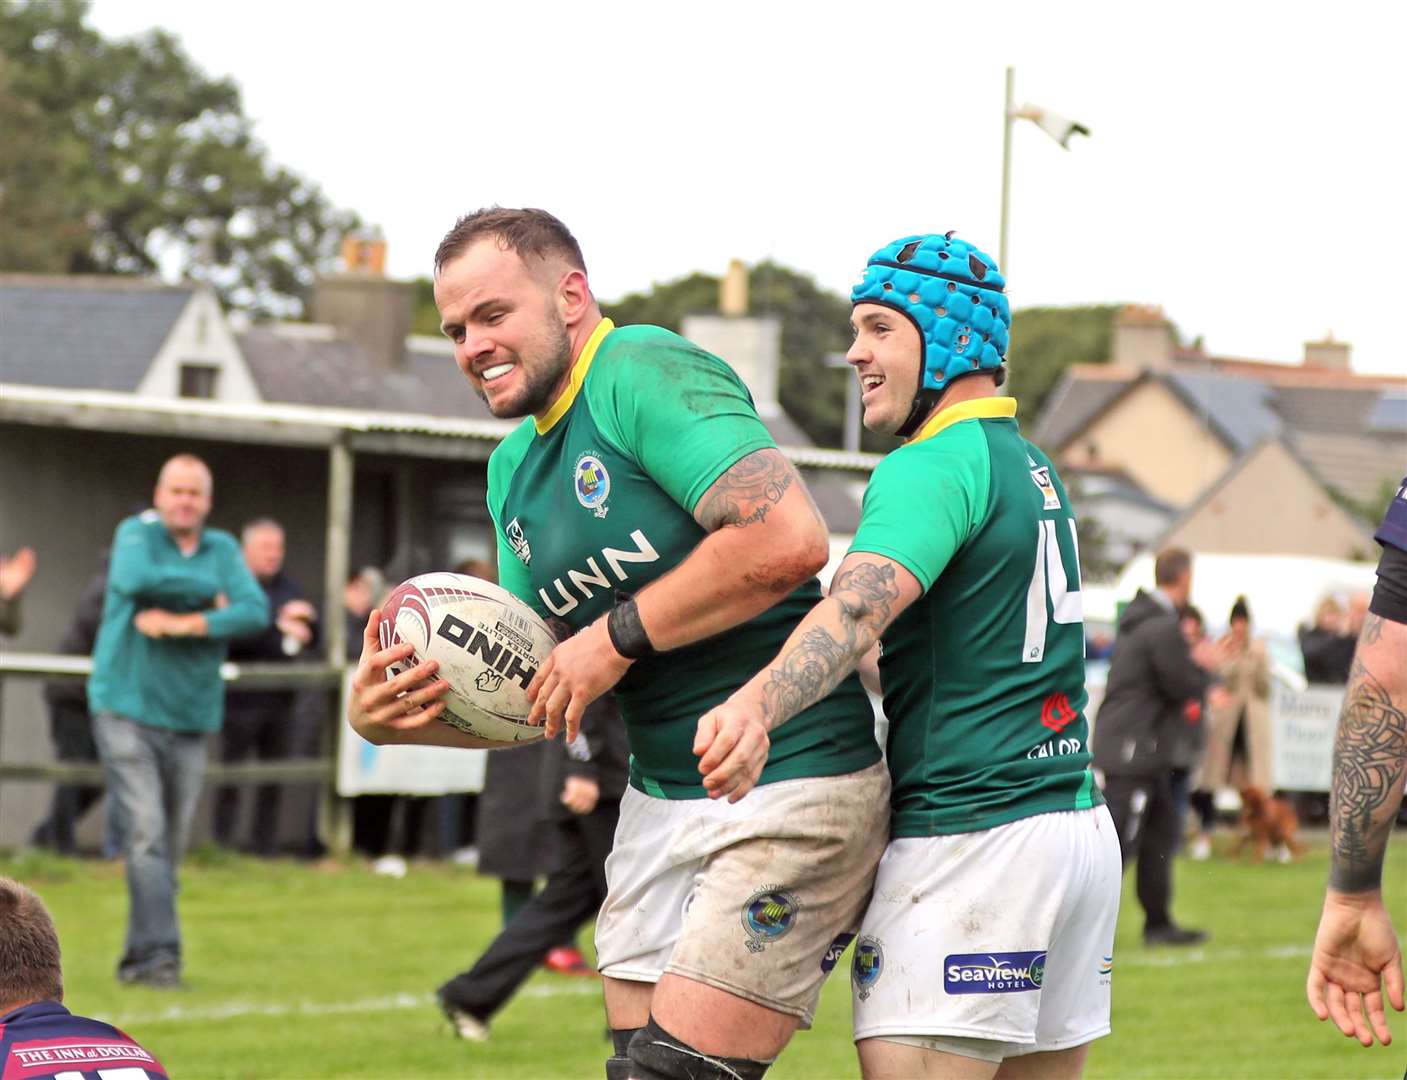 Grant Anderson (left) is congratulated by Cameron Ryder after scoring a try in a 27-12 victory over Hillfoots at Millbank in September. Picture: James Gunn